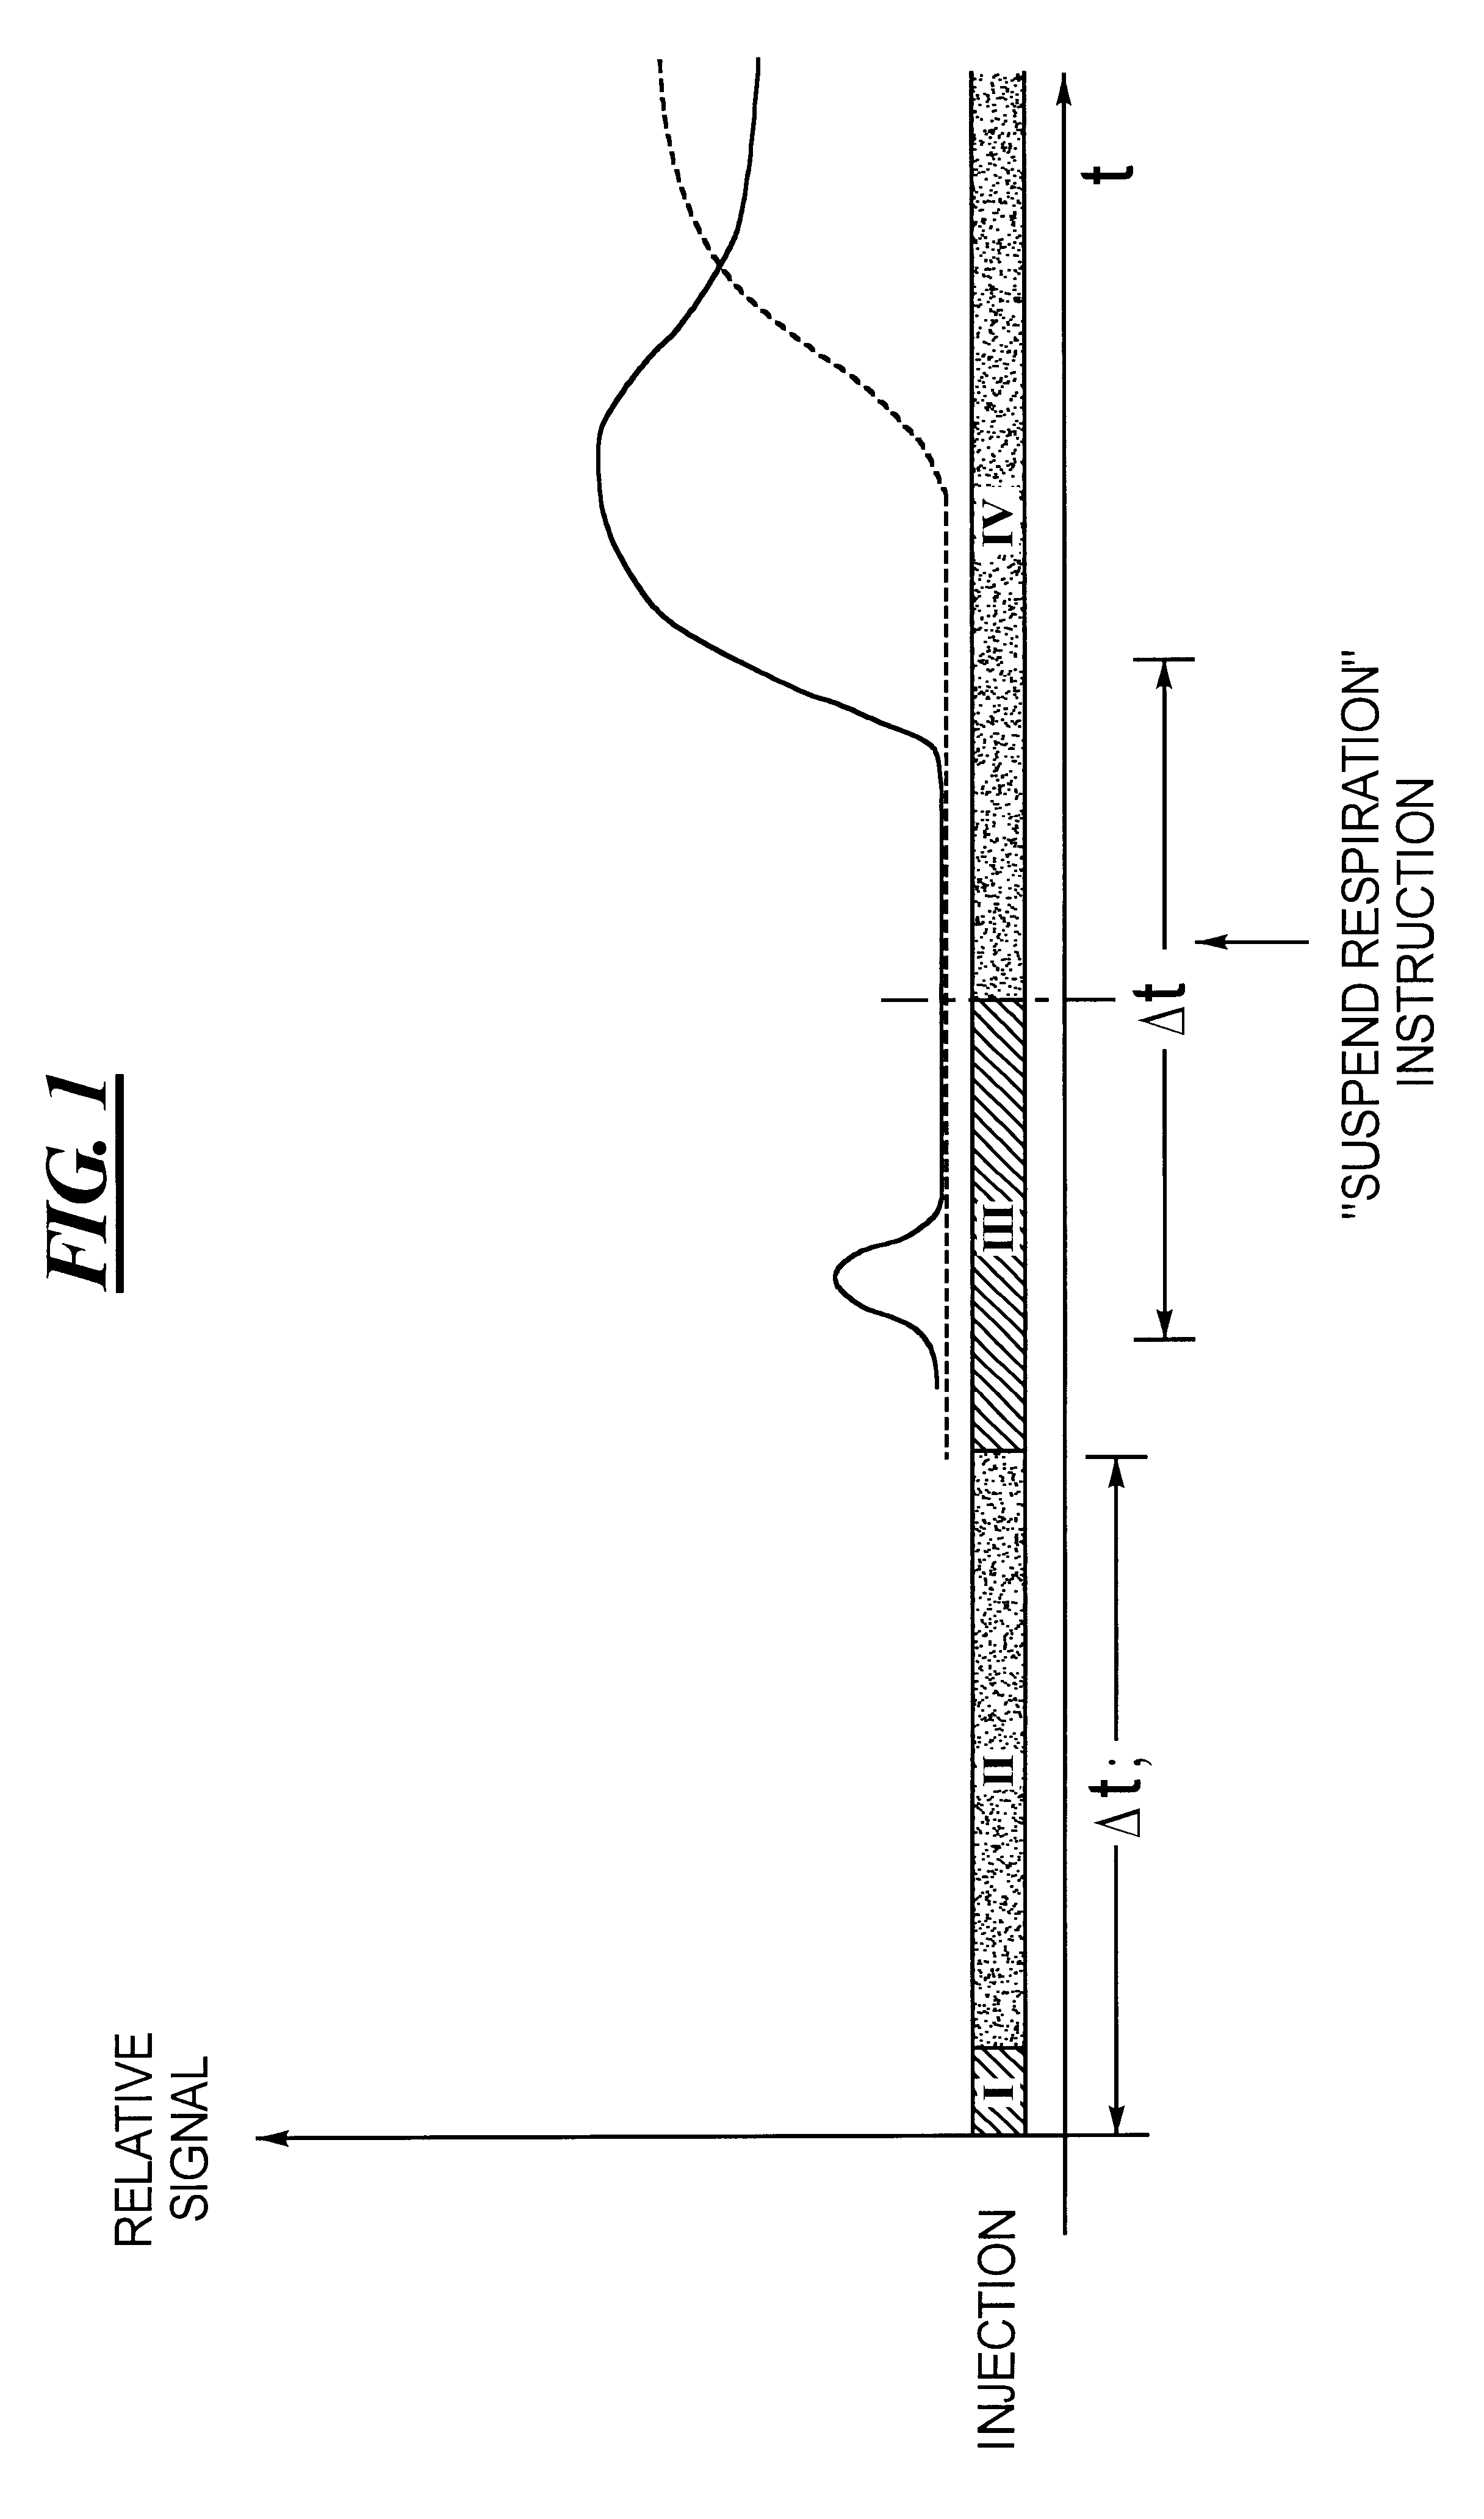 Method and control apparatus for tracking a contrast agent in an examination subject using a medical imaging device